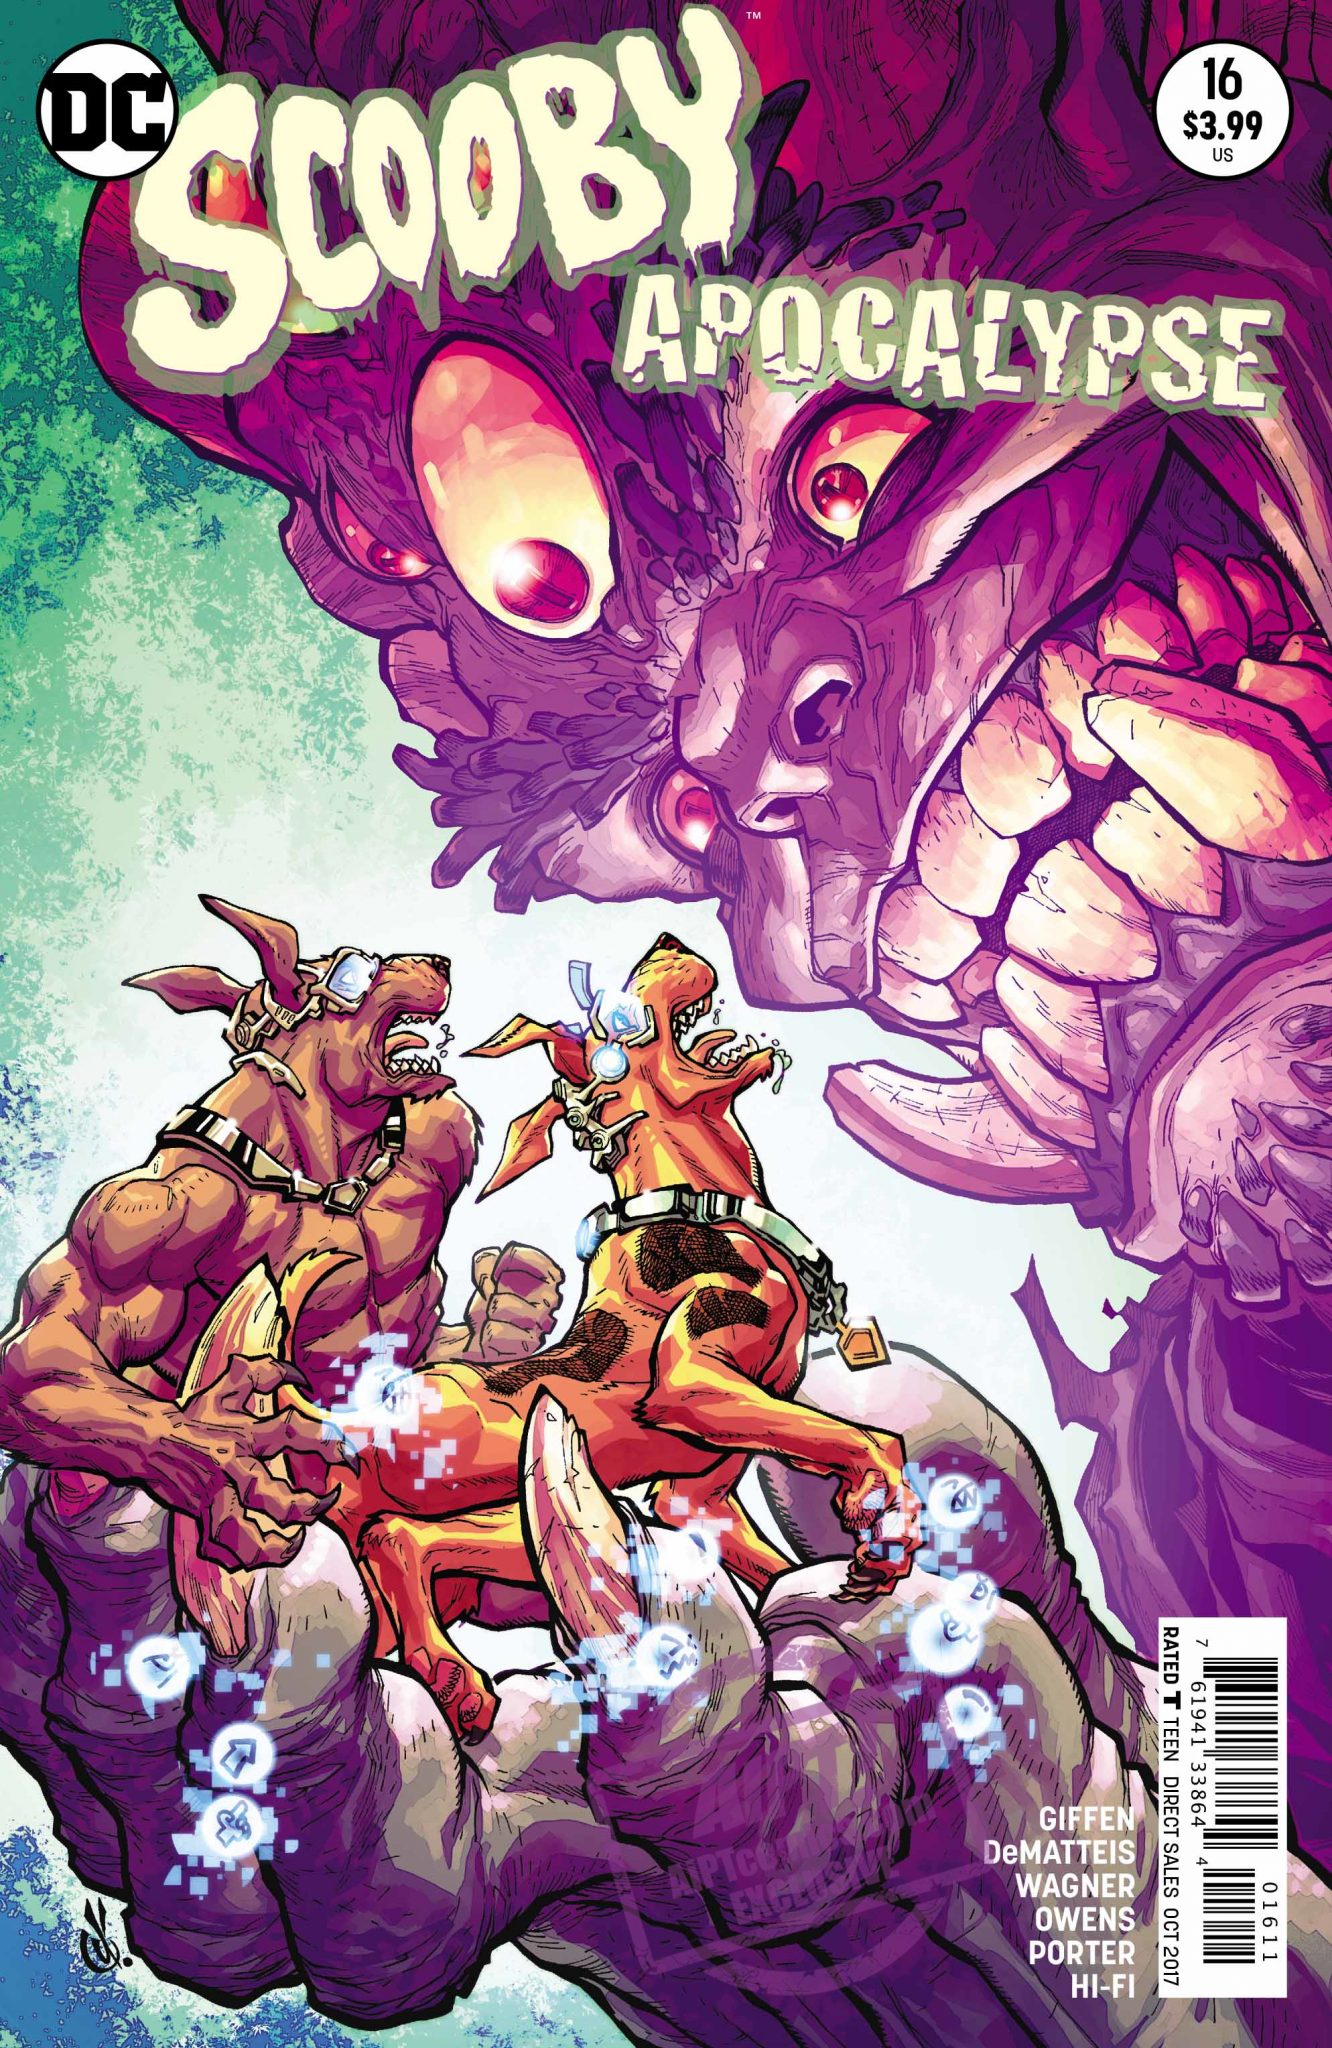 [EXCLUSIVE] DC Preview: Scooby Apocalypse #16